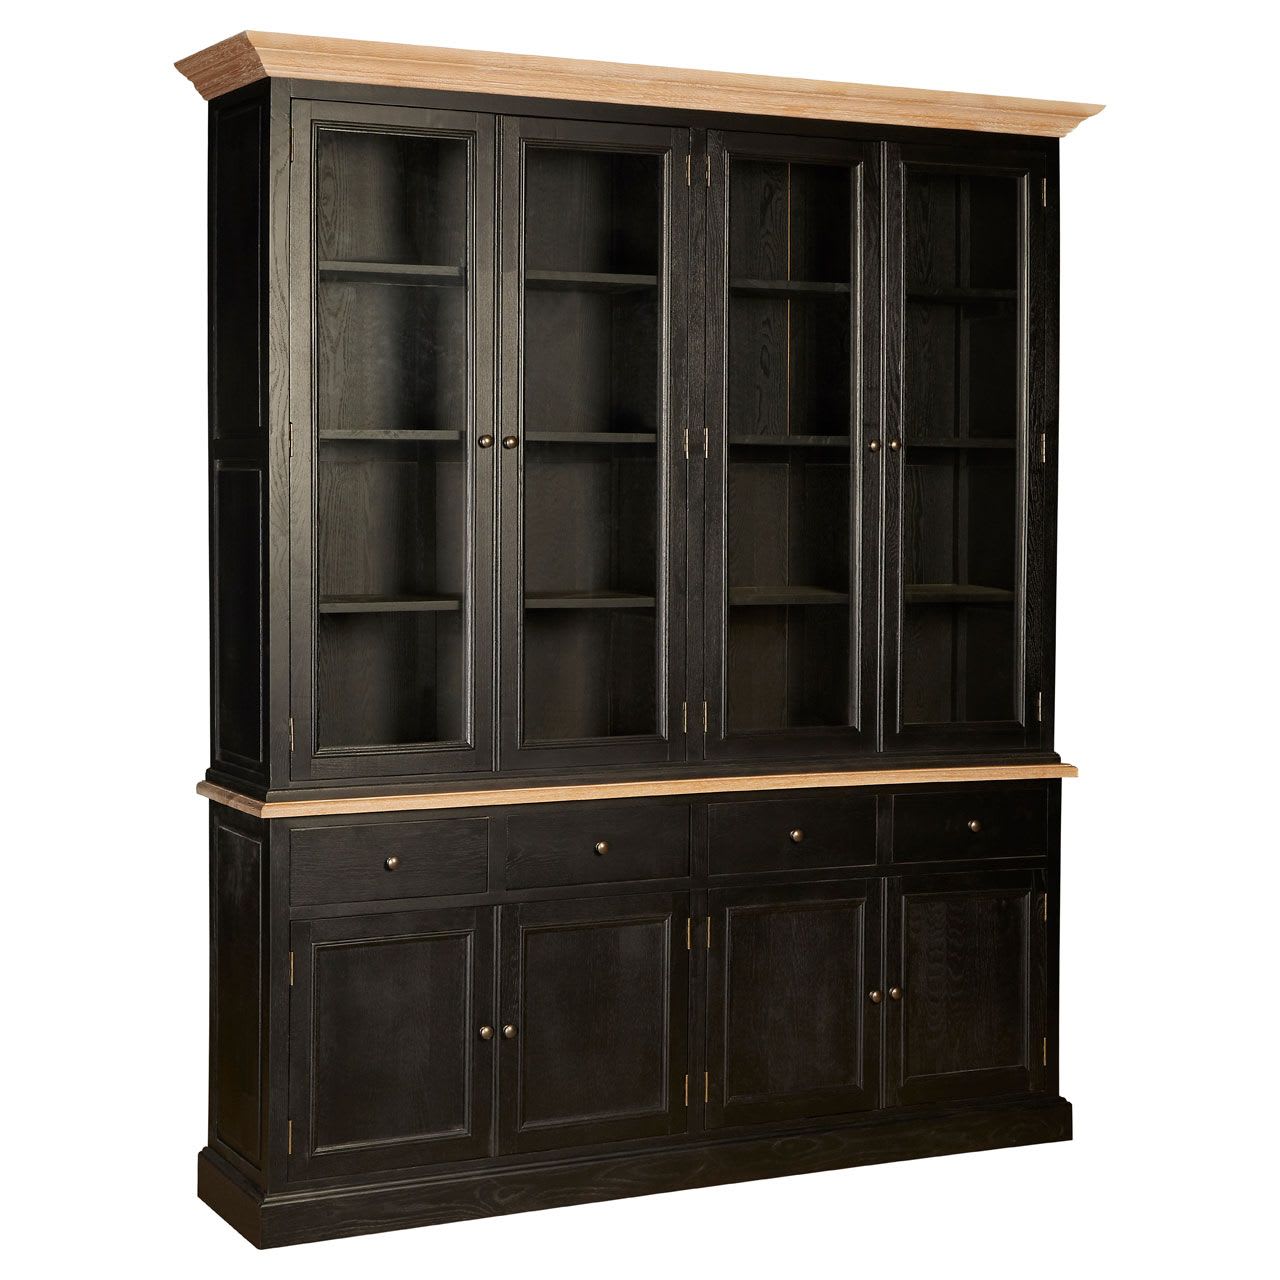 Lille Black Large Display Bookcase